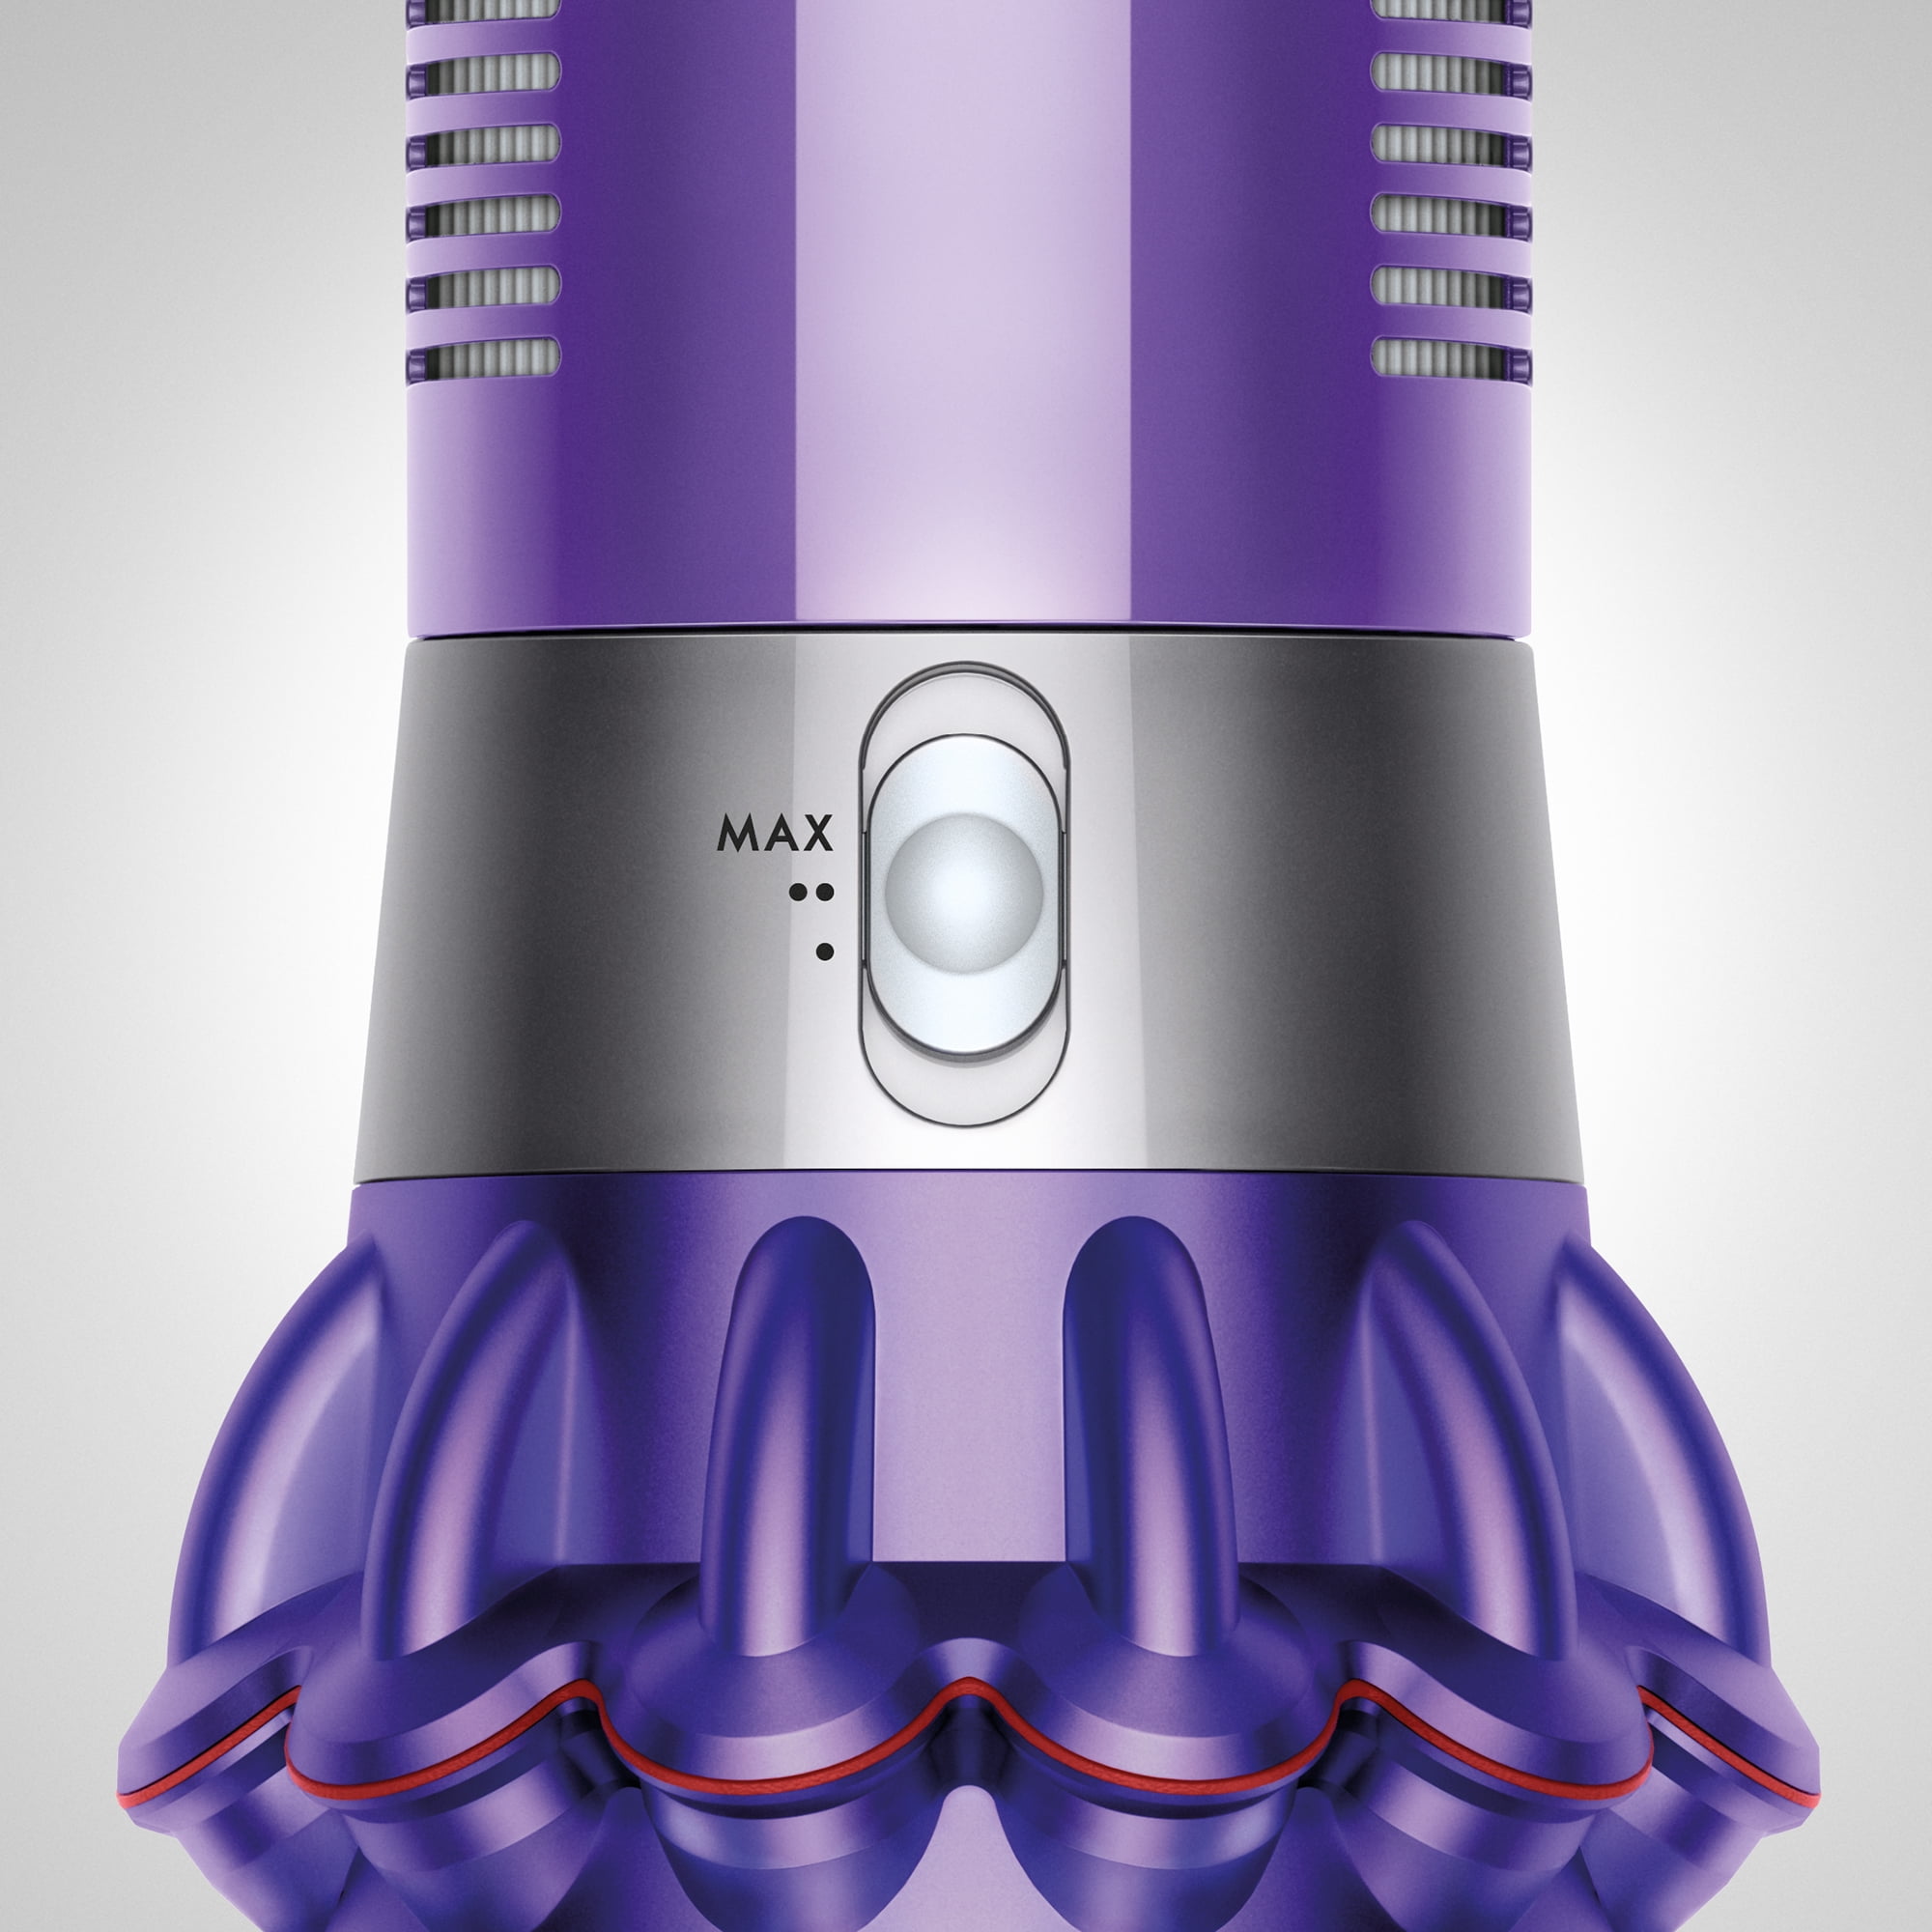 Dyson V10 Animal + Cordless Vacuum Cleaner, Purple, Certified Refurbished  885609016481